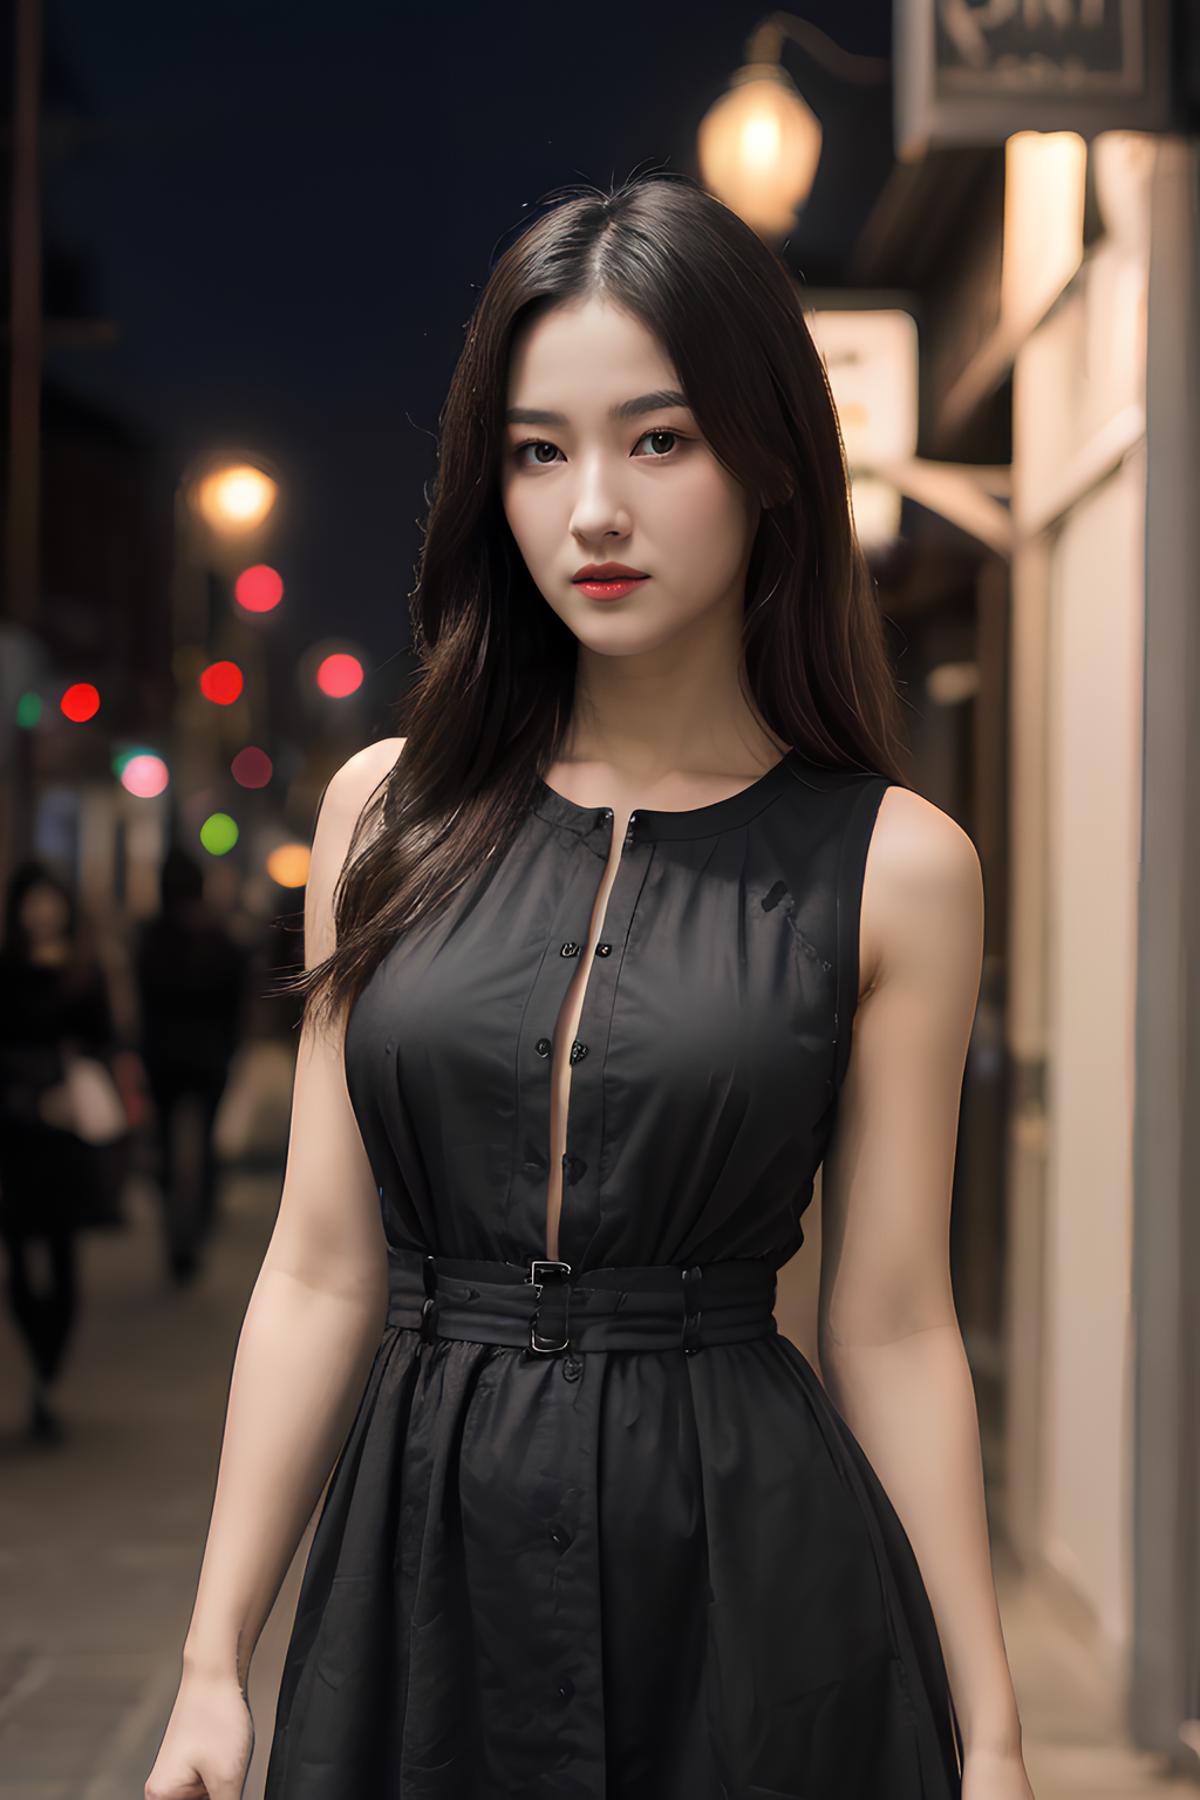 Not Momoland - Nancy image by Tissue_AI